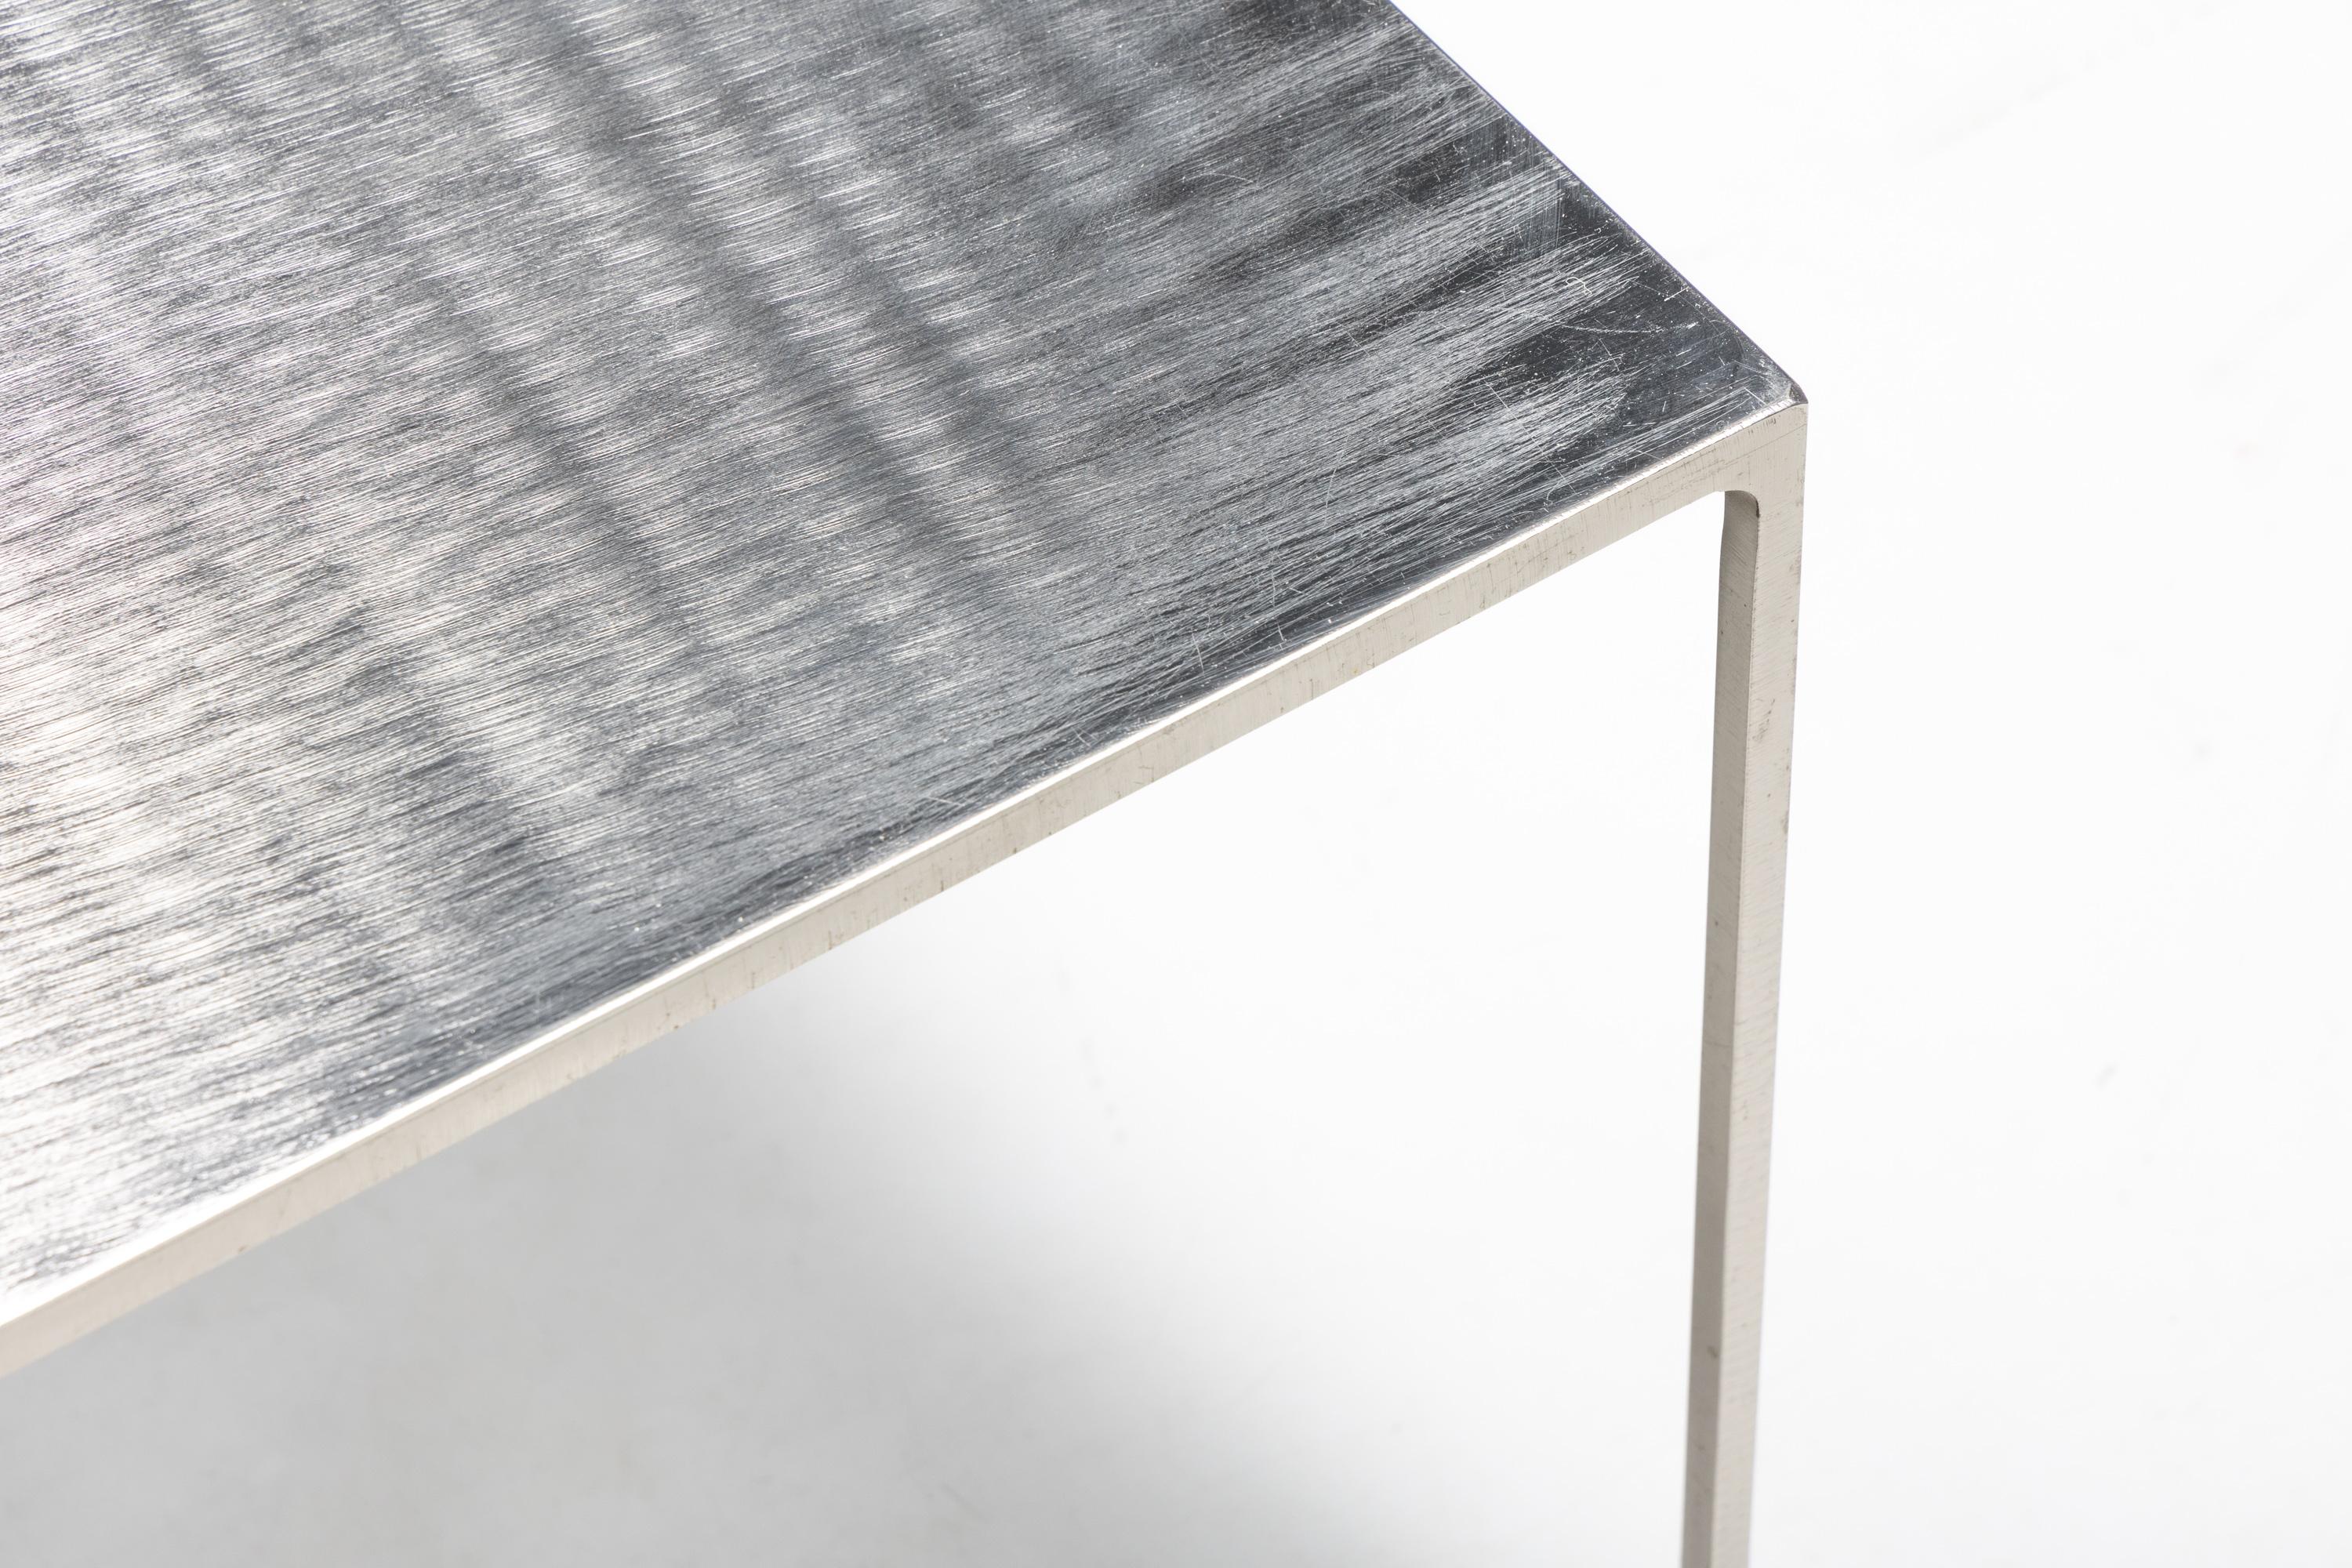 Late 20th Century Metal Square Coffee Table 'Duchamp' by Rodolfo Dordoni for Minotti, Italy, 1990s For Sale